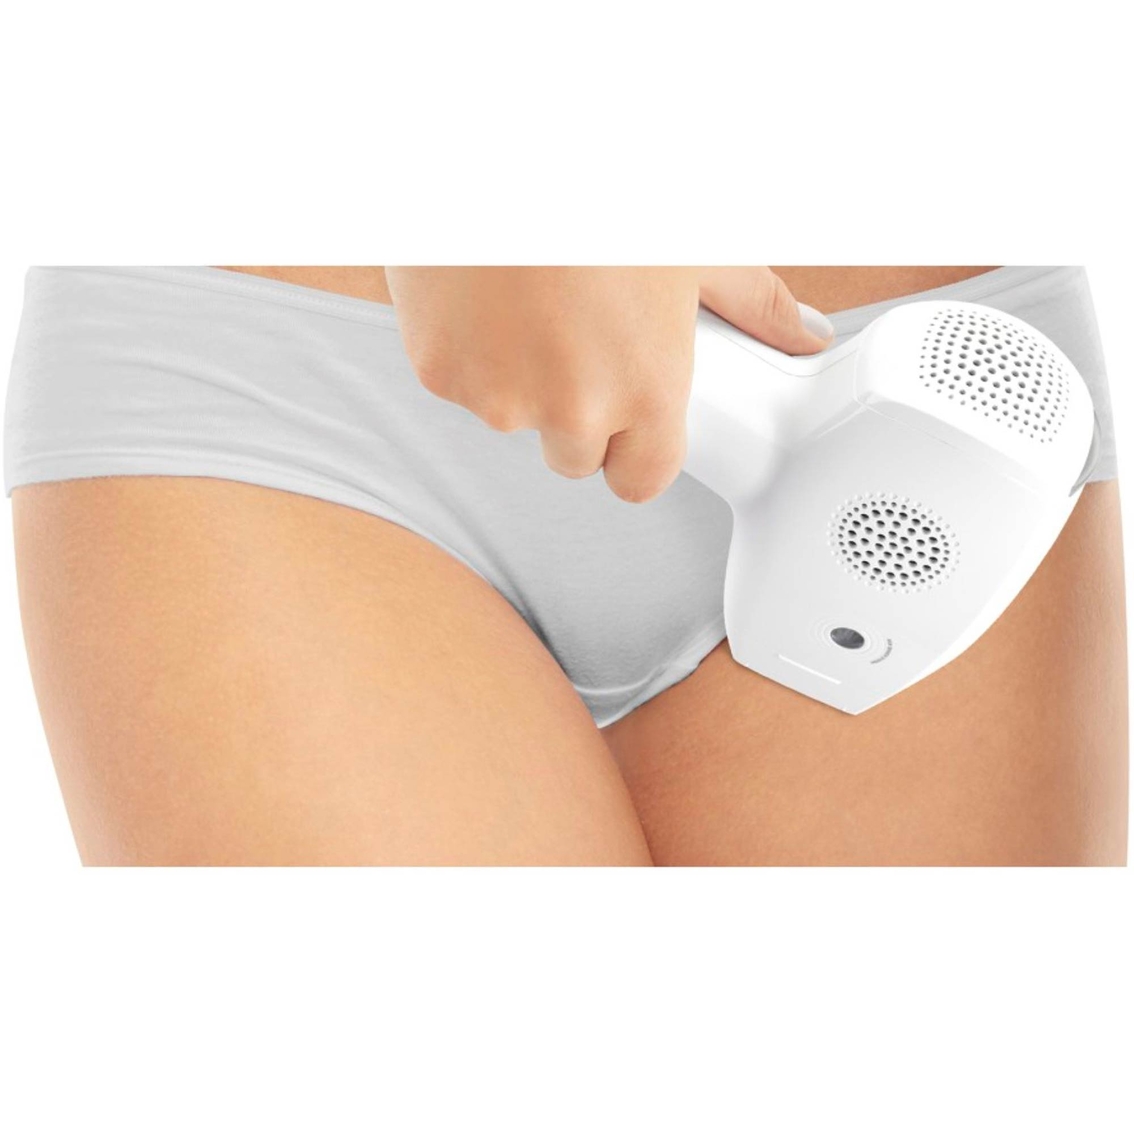 Conair Lumilisse Intense Pulsed Light Hair Removal Device - Image 8 of 10